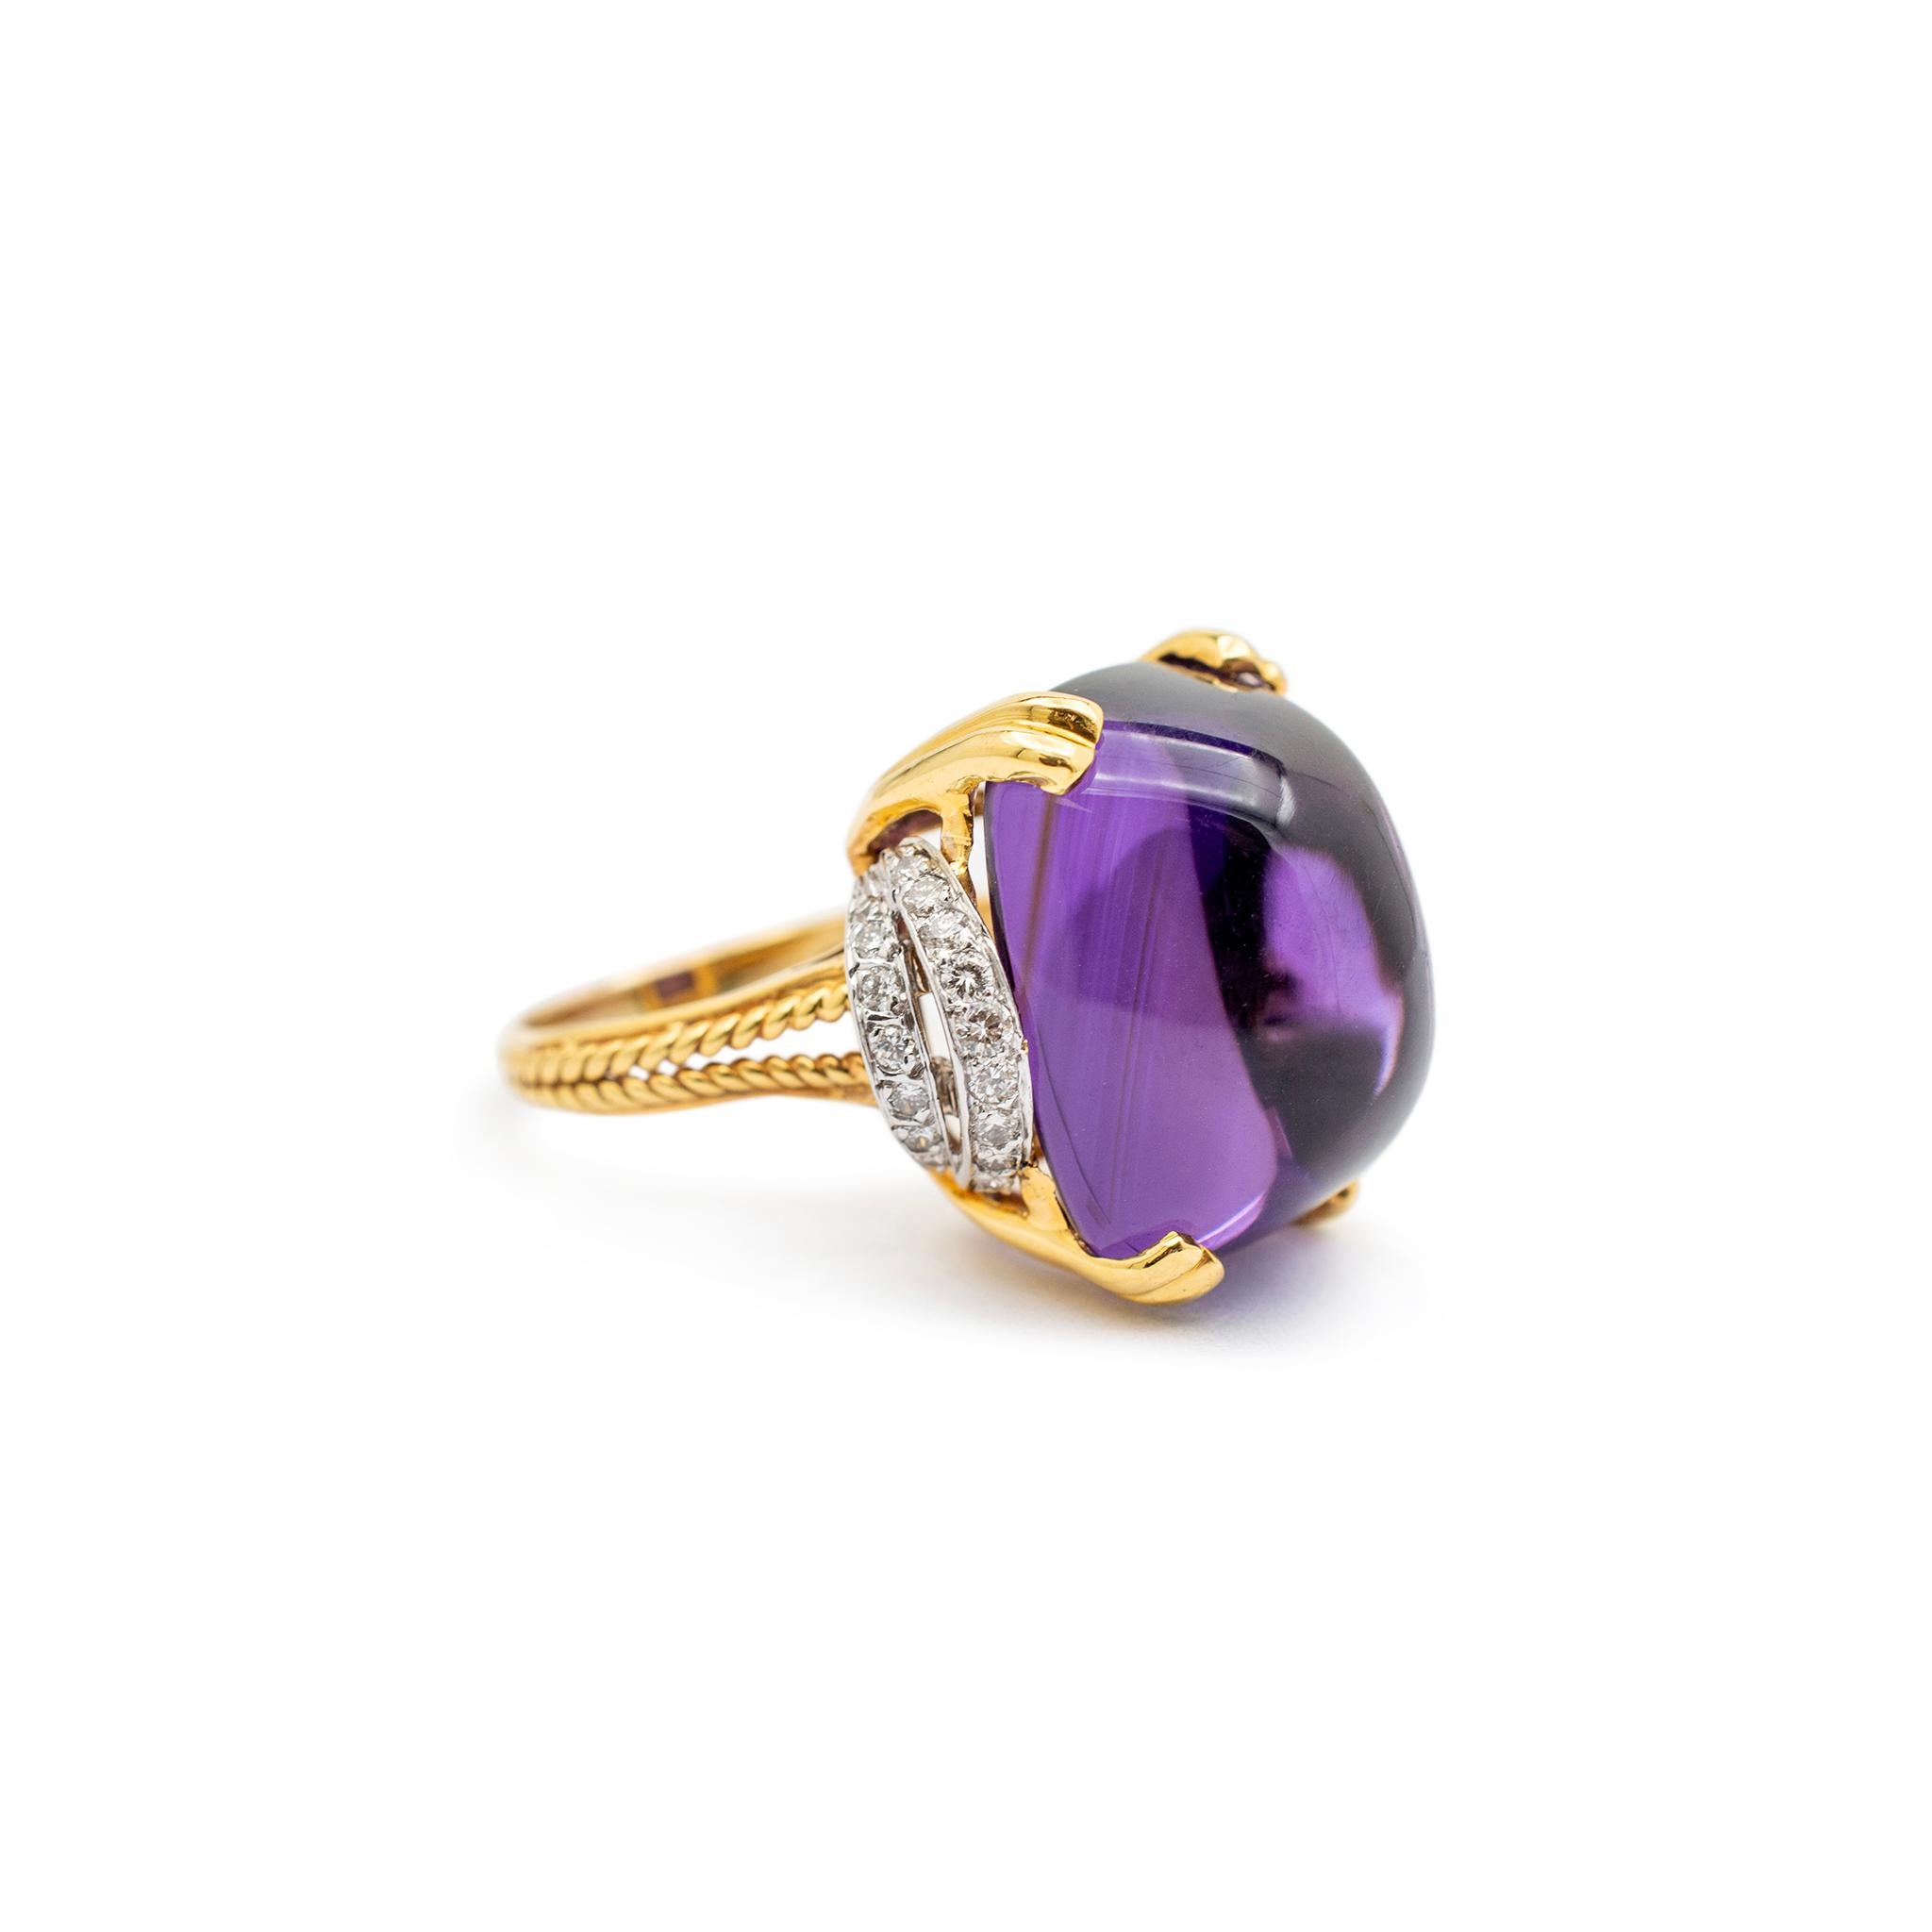 Cabochon Ladies 14K Yellow & White Gold Amethyst Diamond Cocktail Ring For Sale